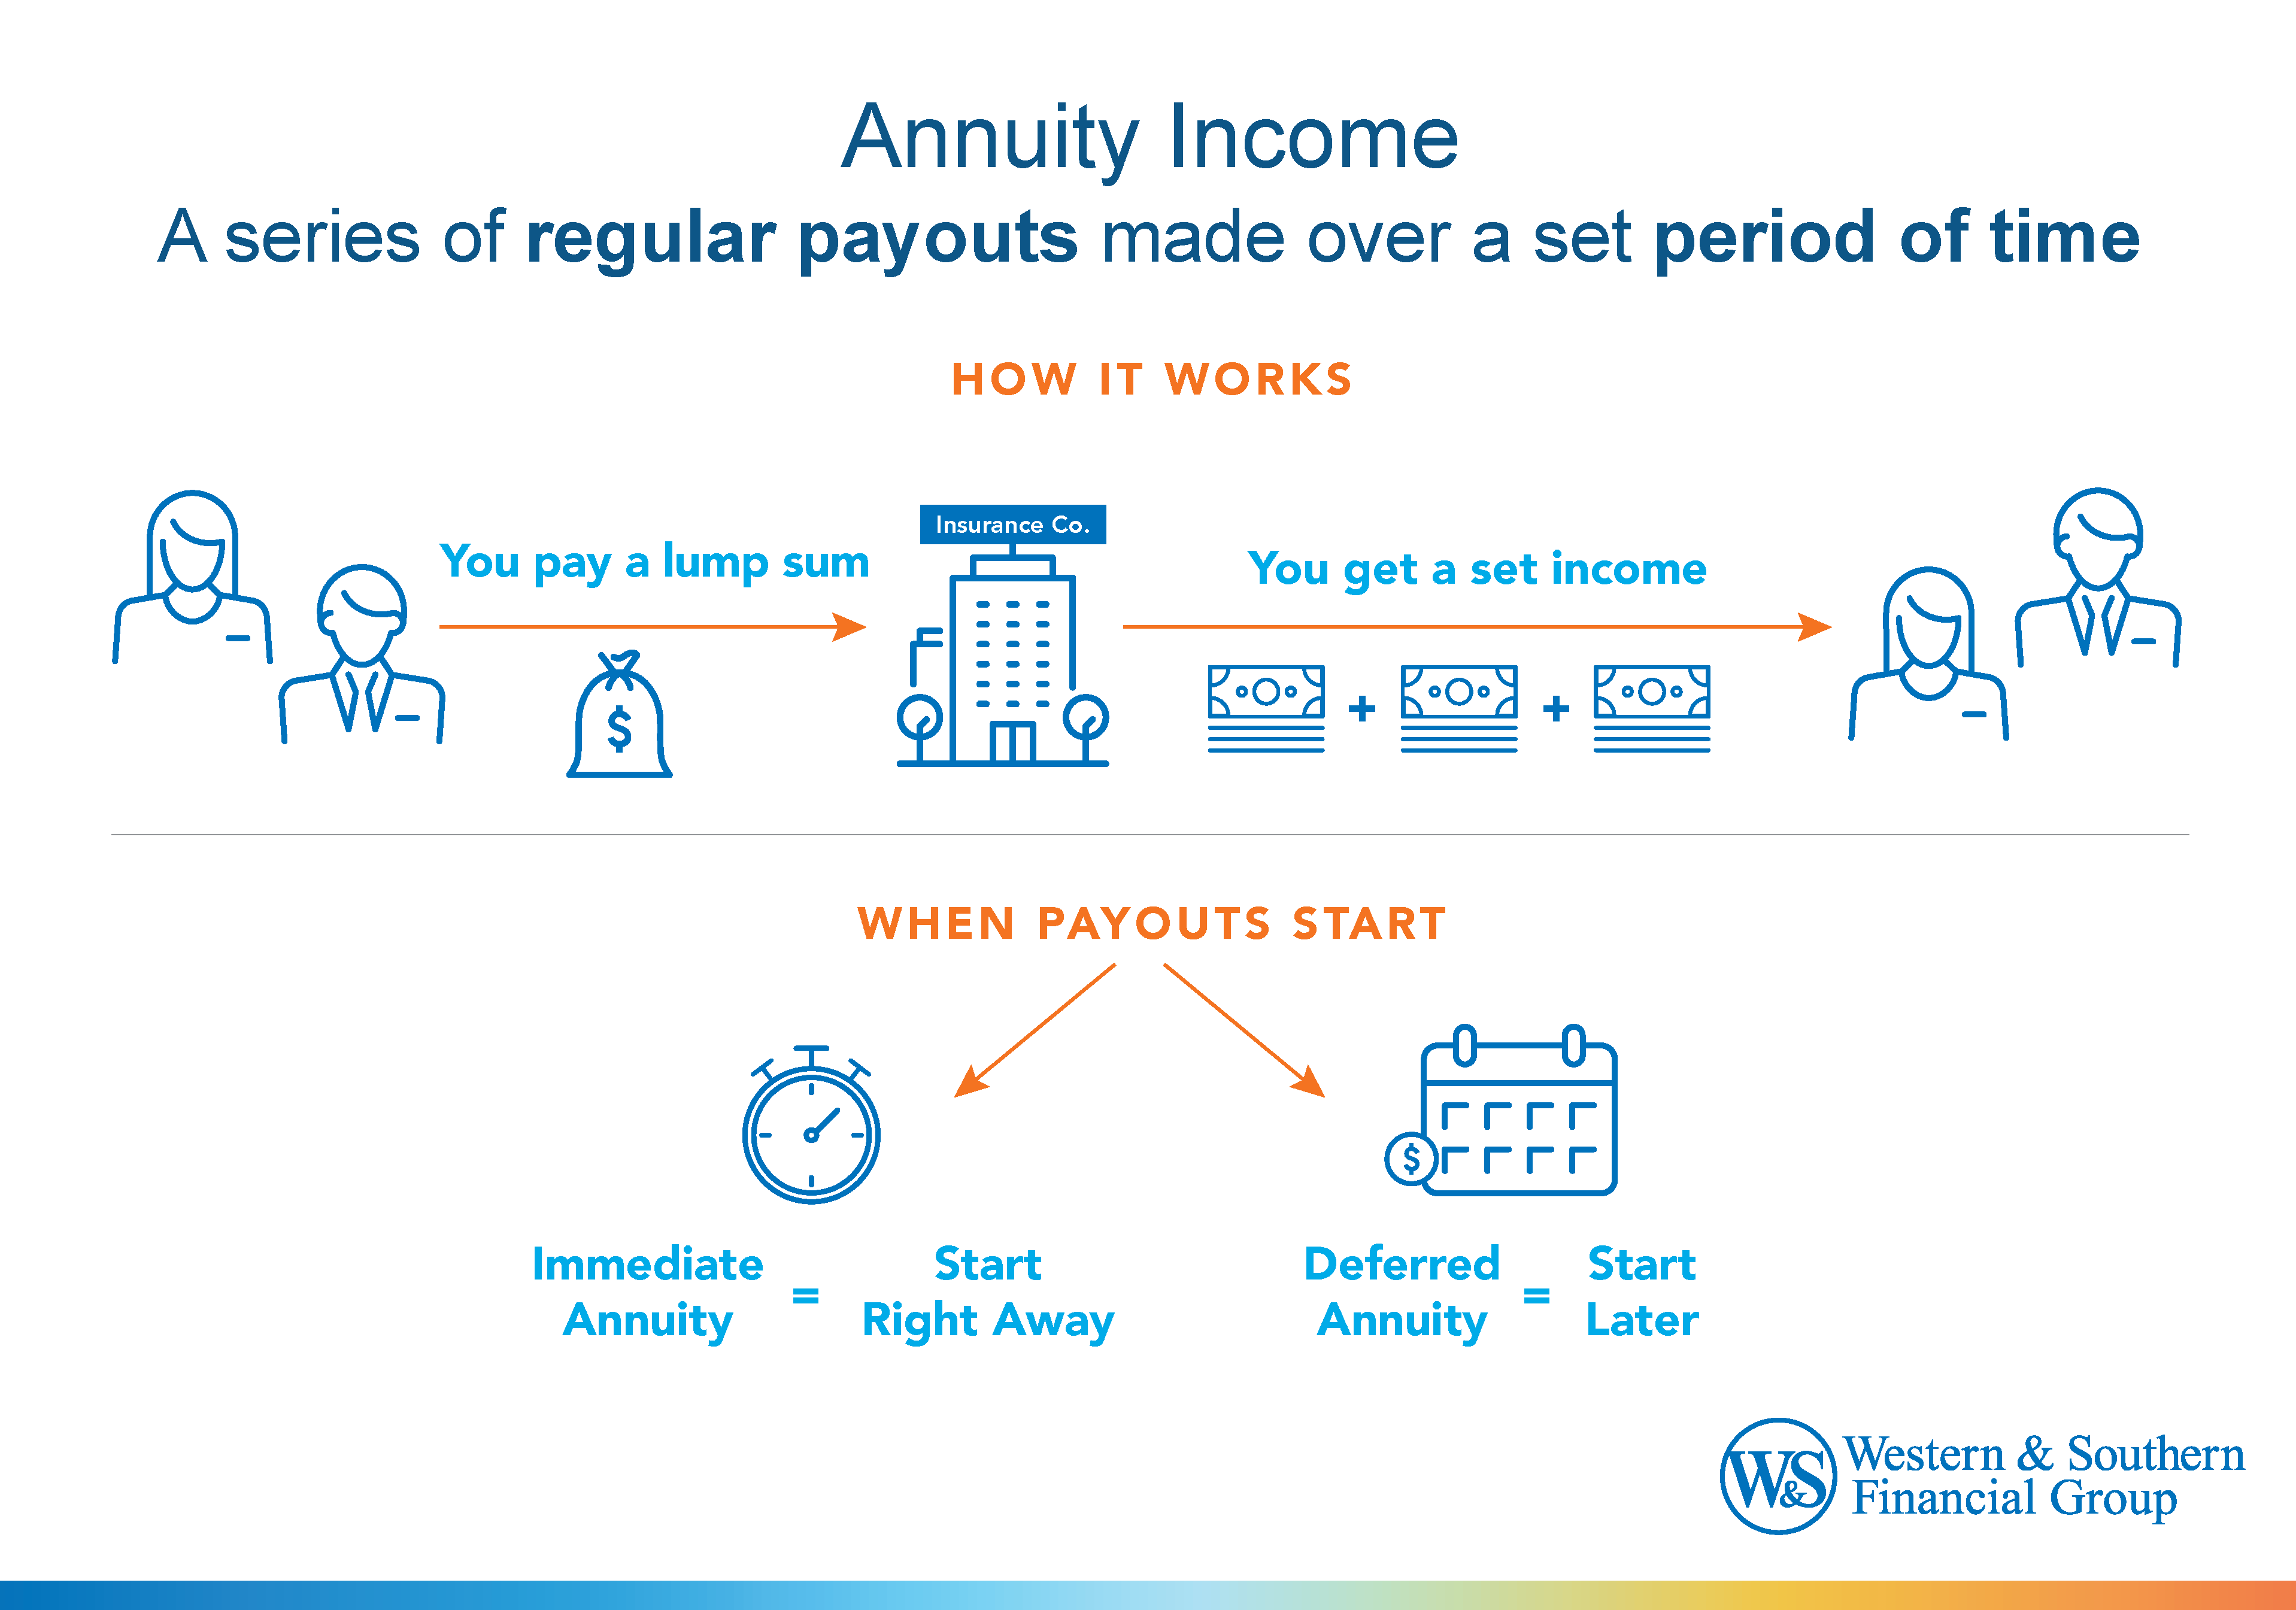 Annuities involve a series of regular payments made over a set period of time.